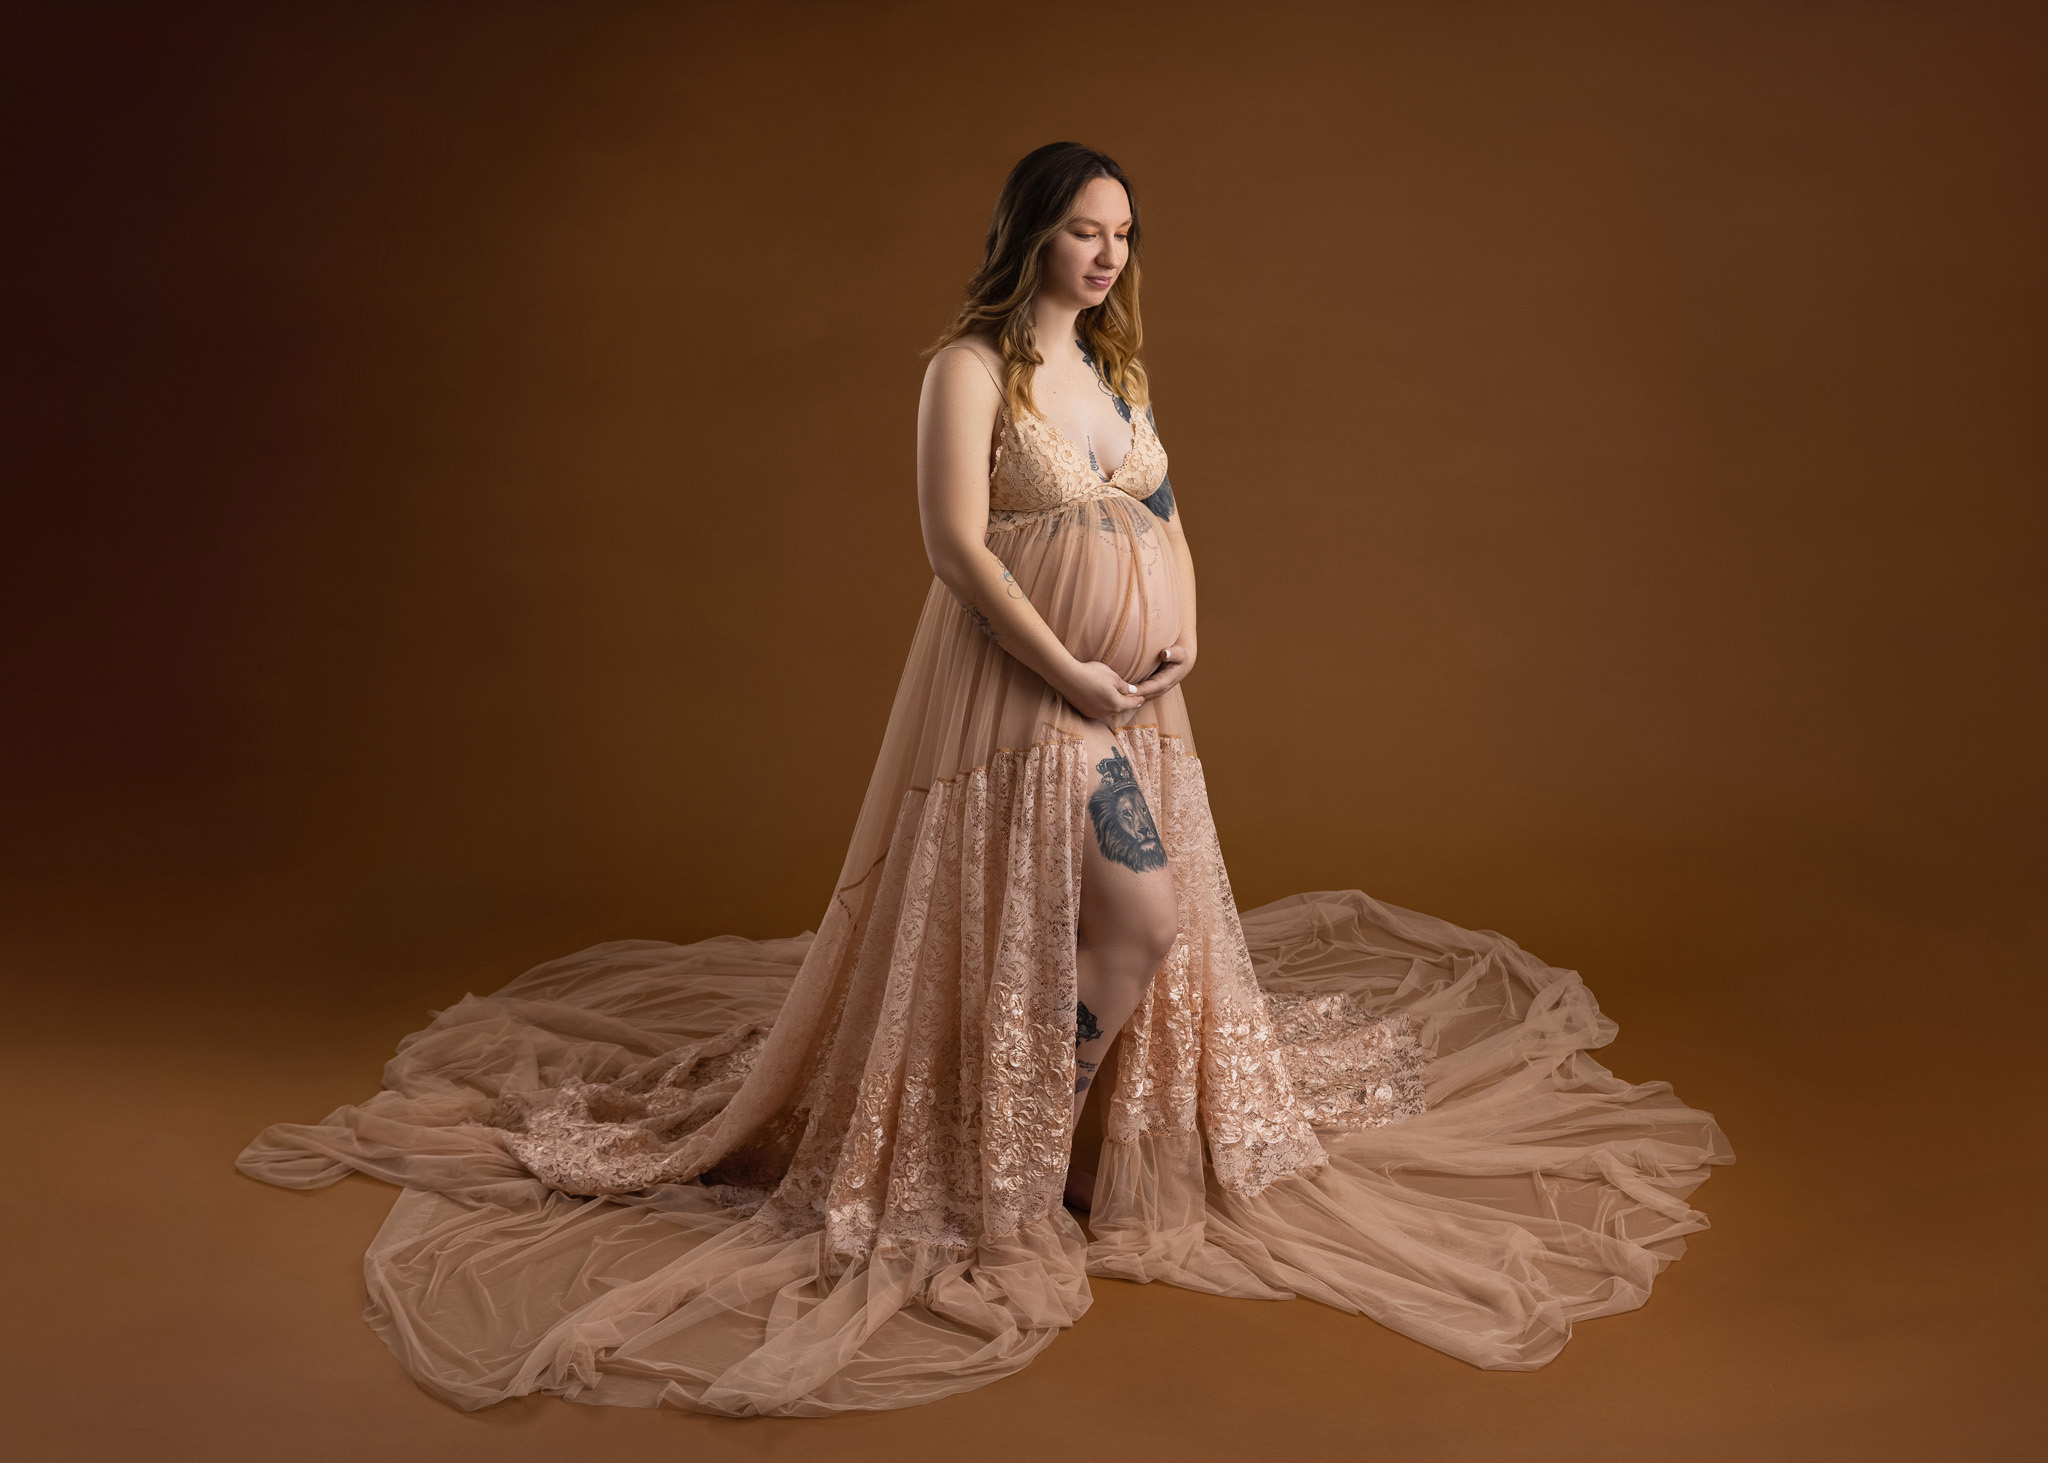 pregnant mom holding her belly with her gace downward wearing a lacy flowy tan dress standing on a brown backdrop